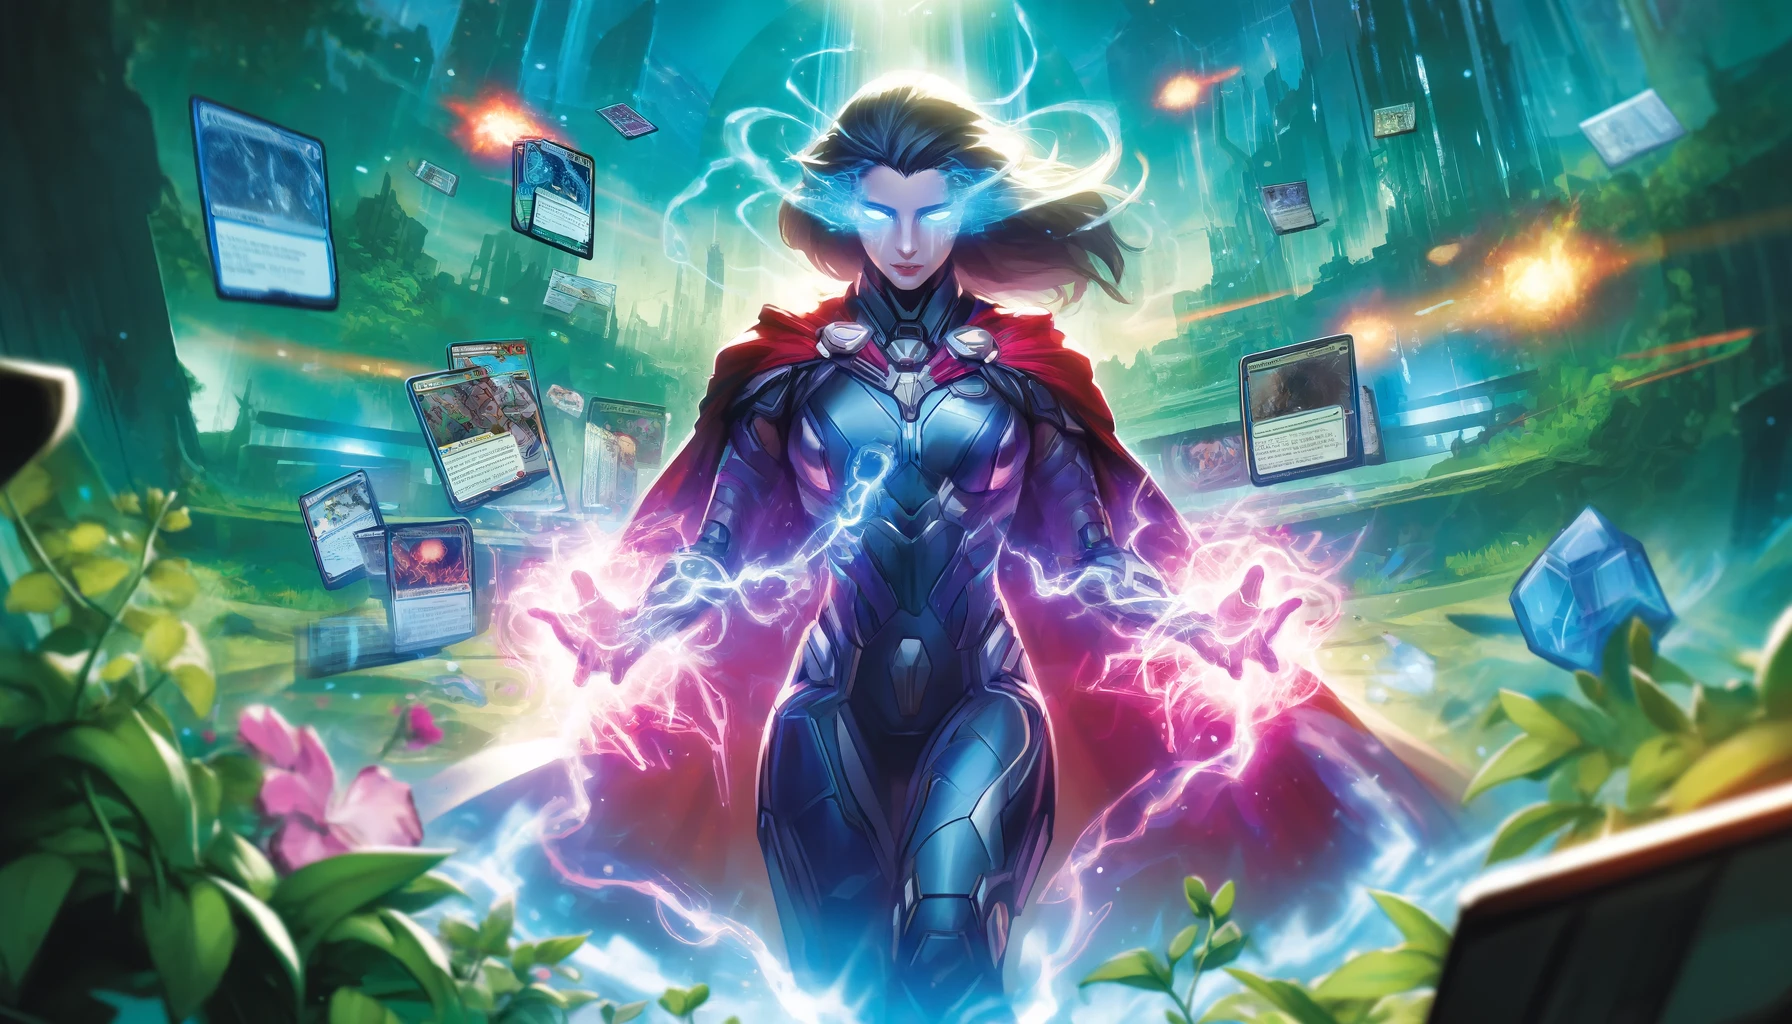 llustration of Nocturne in Marvel Snap casting her chaotic abilities with energy effects, depicted on a battlefield that blends a futuristic cityscape with a verdant forest. The image captures the vibrant and energetic essence of her power to shift game dynamics.